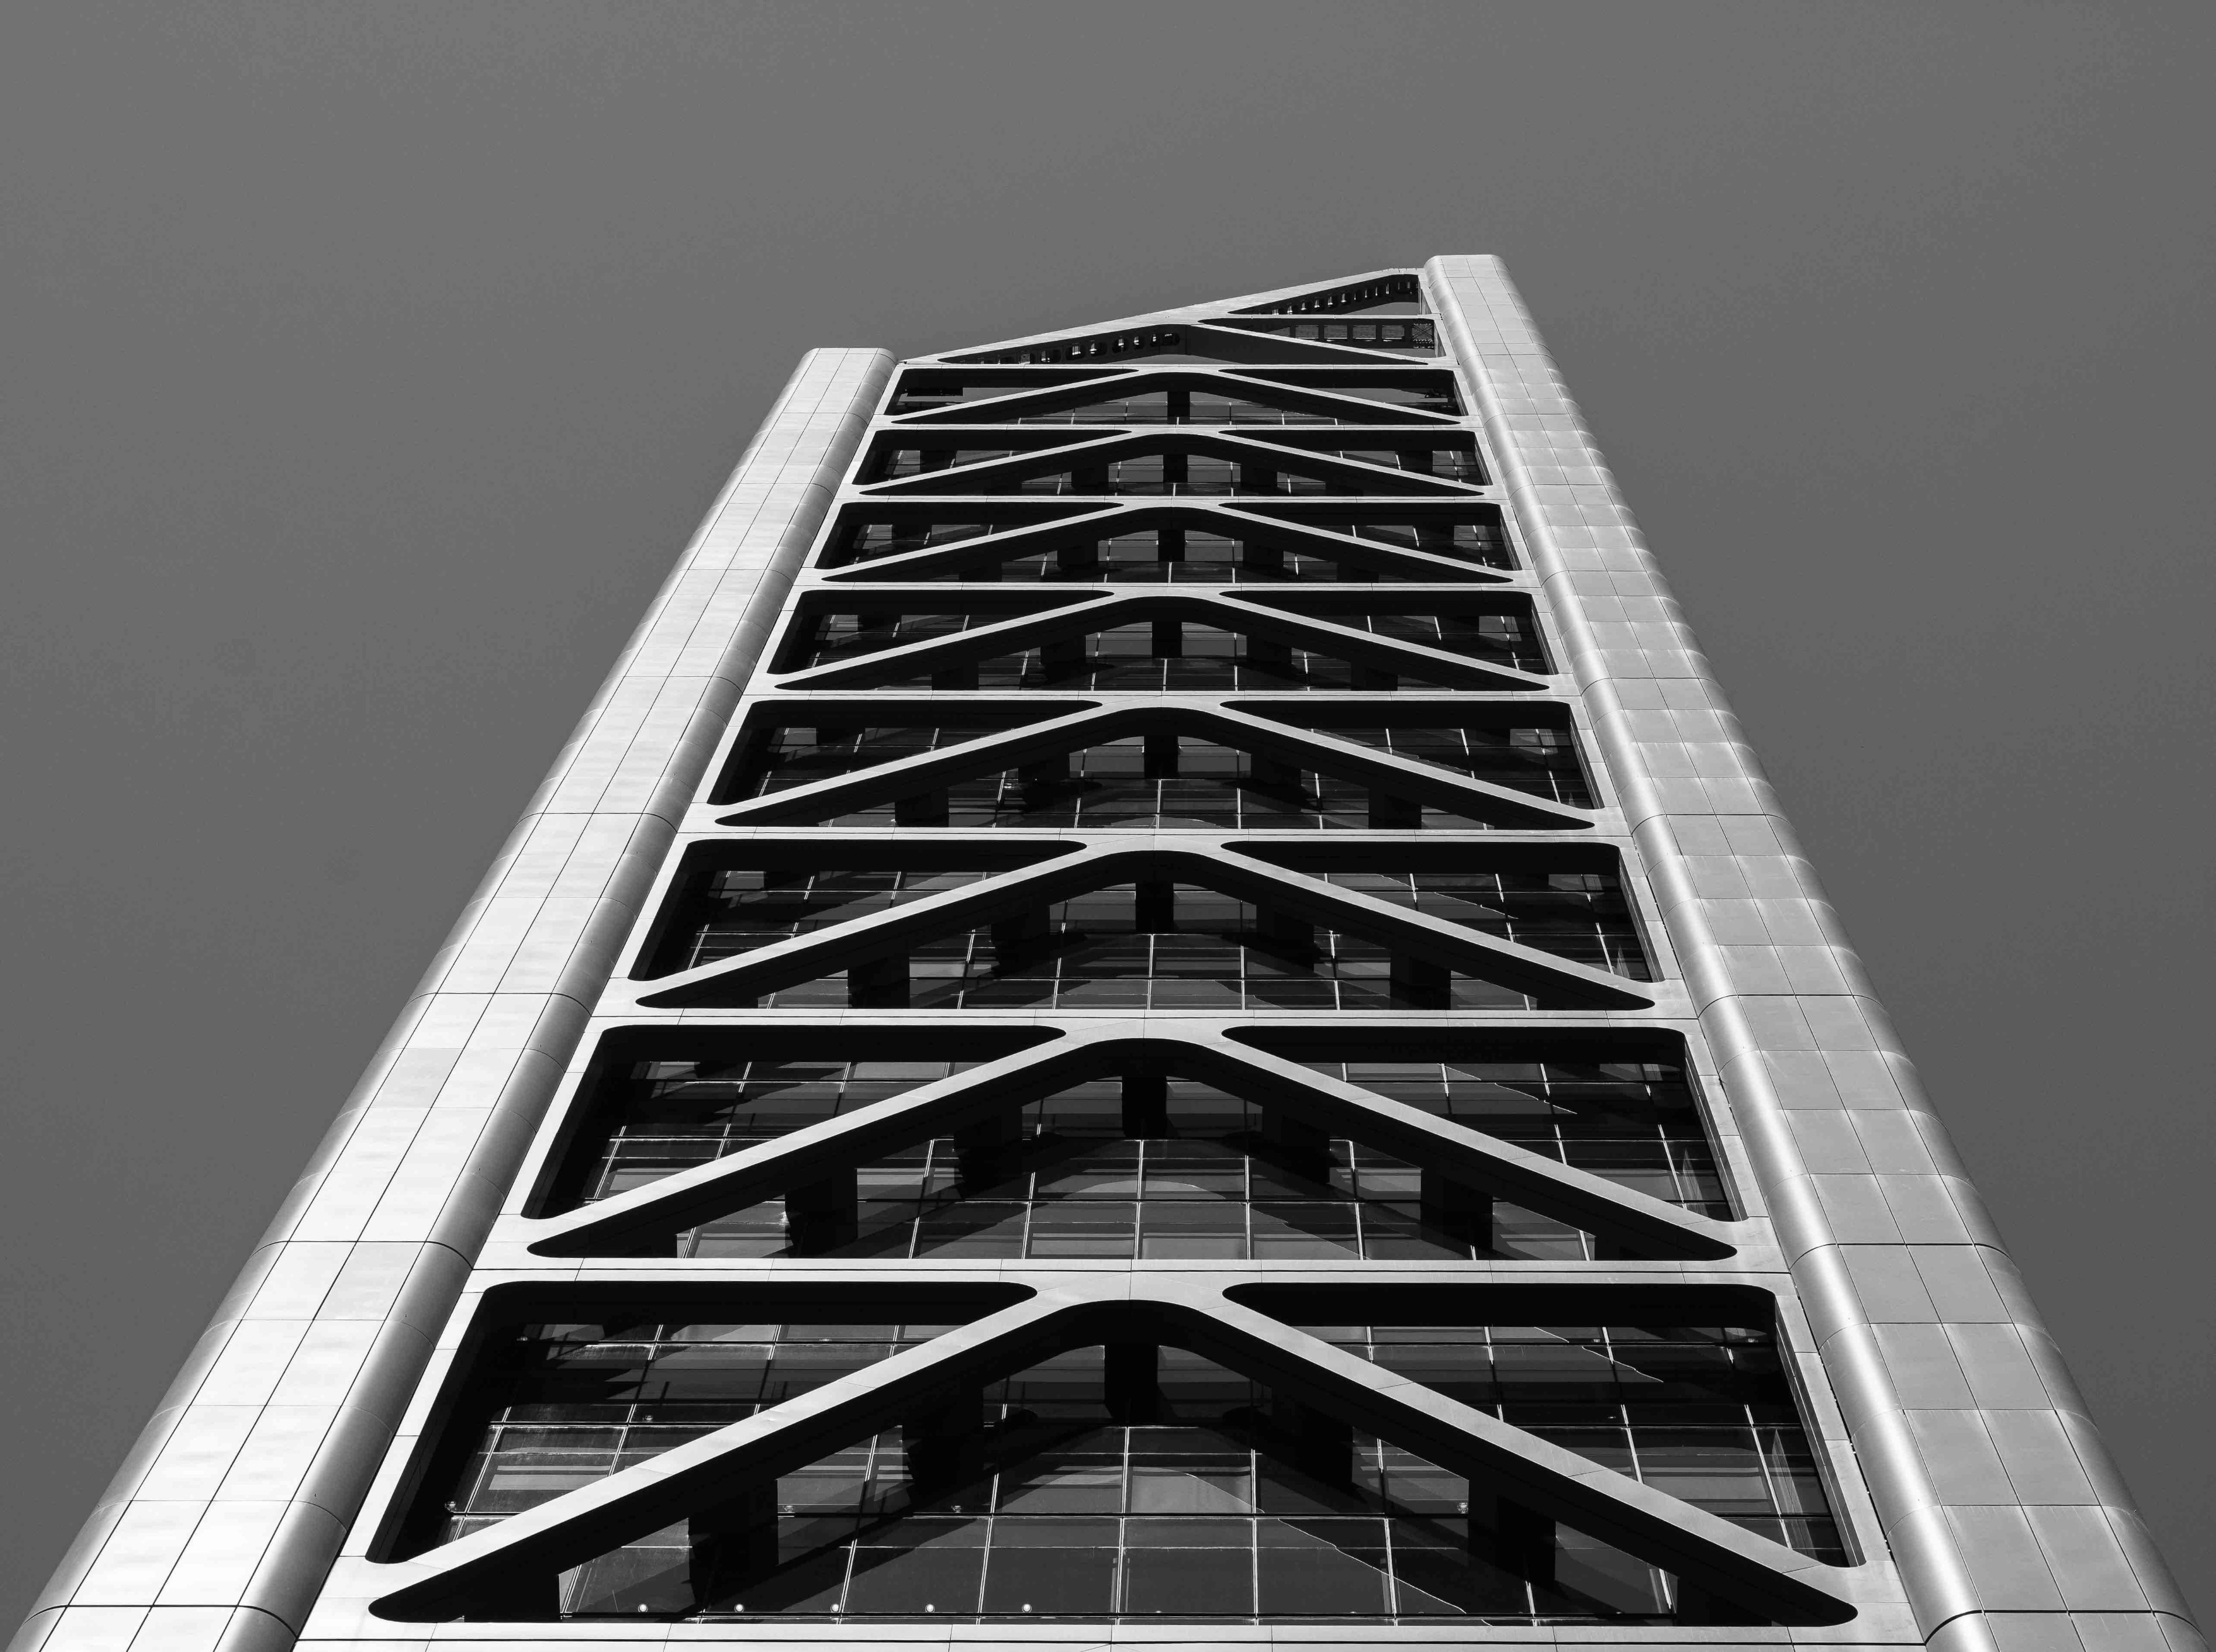 One of the newer high rises in Perth W.A., I like the simplicity of this image.
#Perspectives